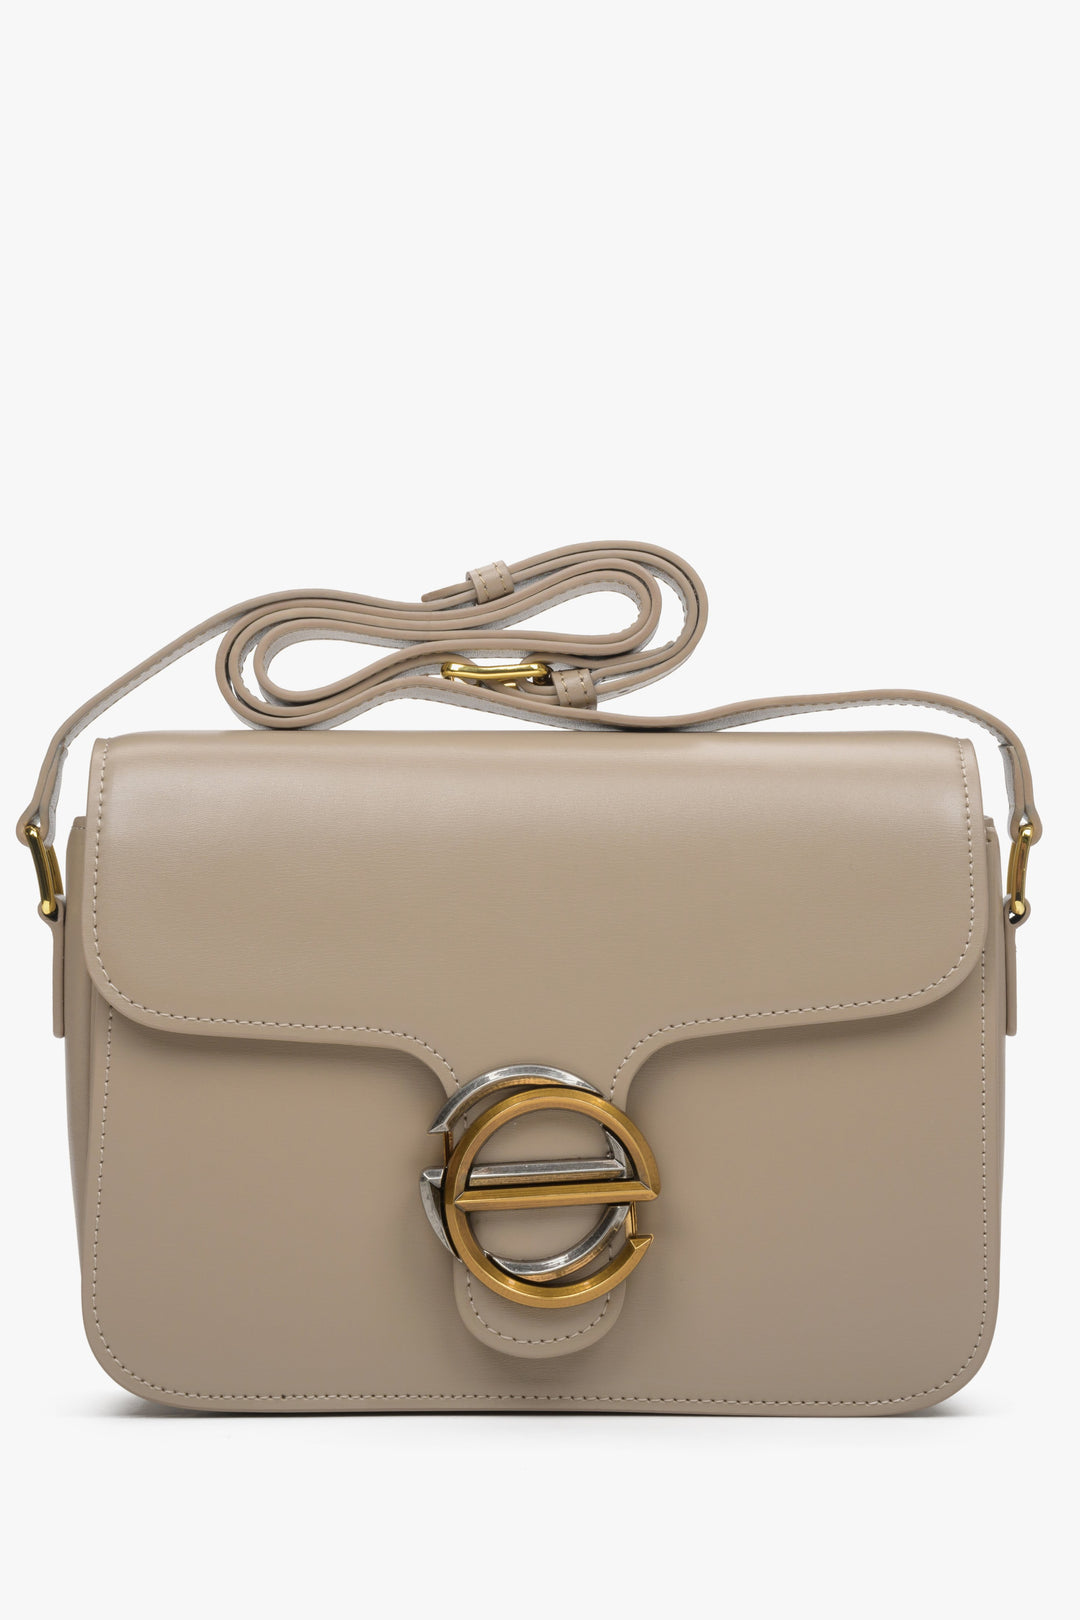 Women's Small Grey & Beige Handbag with Gold Hardware made of Leather Estro ER00113336.